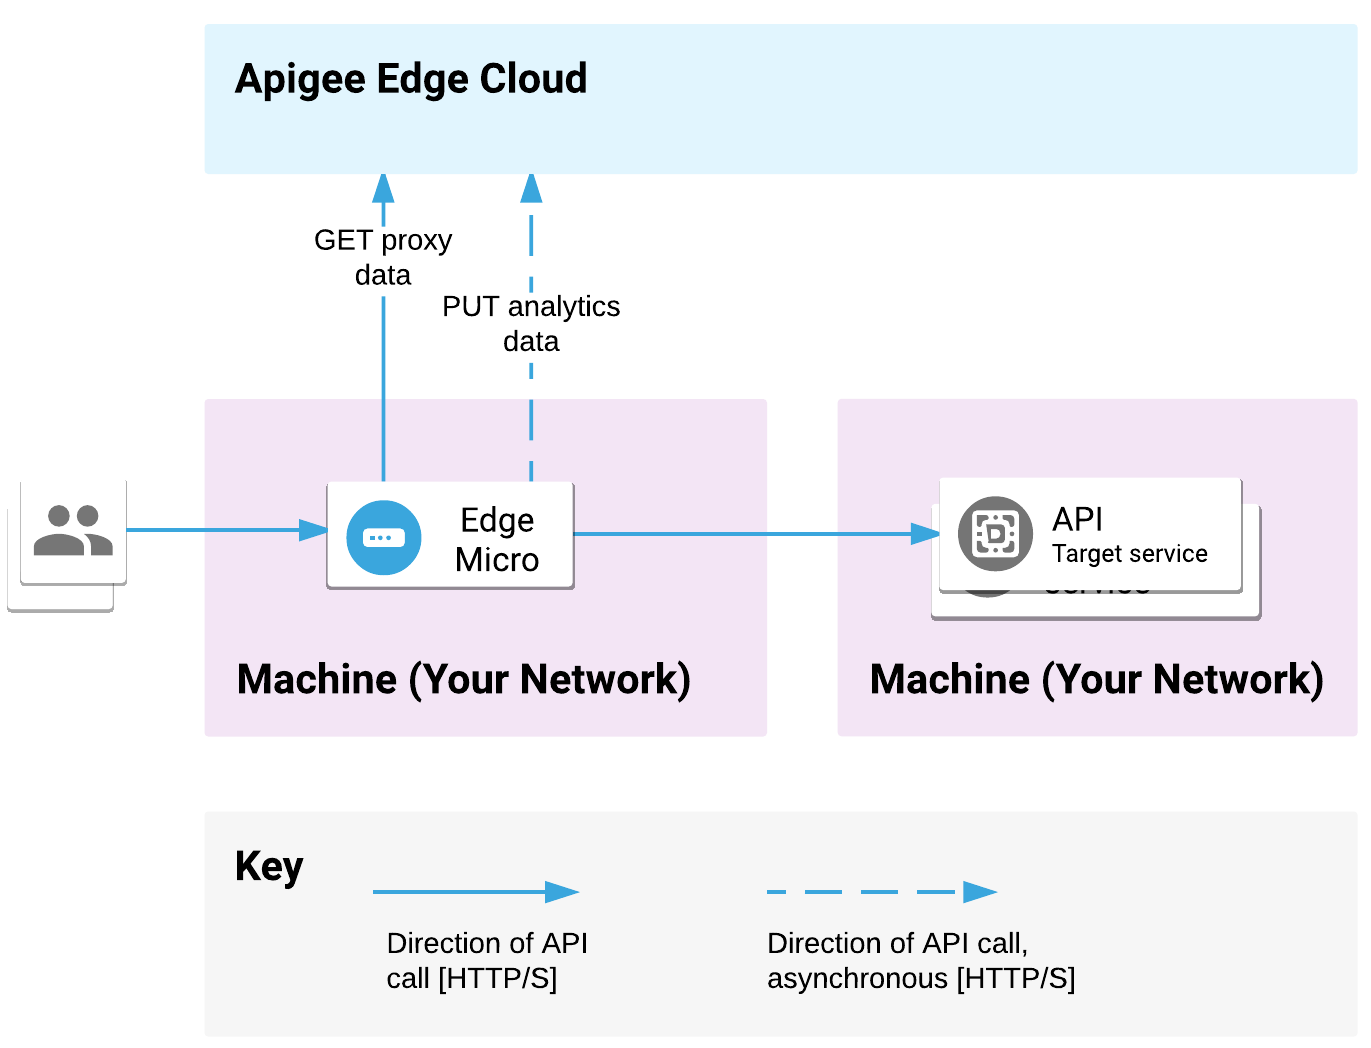 Edge Microgateway is depoyed on one machine, and backend services are
             deployed in another location. API requests are processed by the microgateway
             and requests are sent backend targets. Microgateway communicates proxy and
             analytics data with Apigee Edge Cloud.